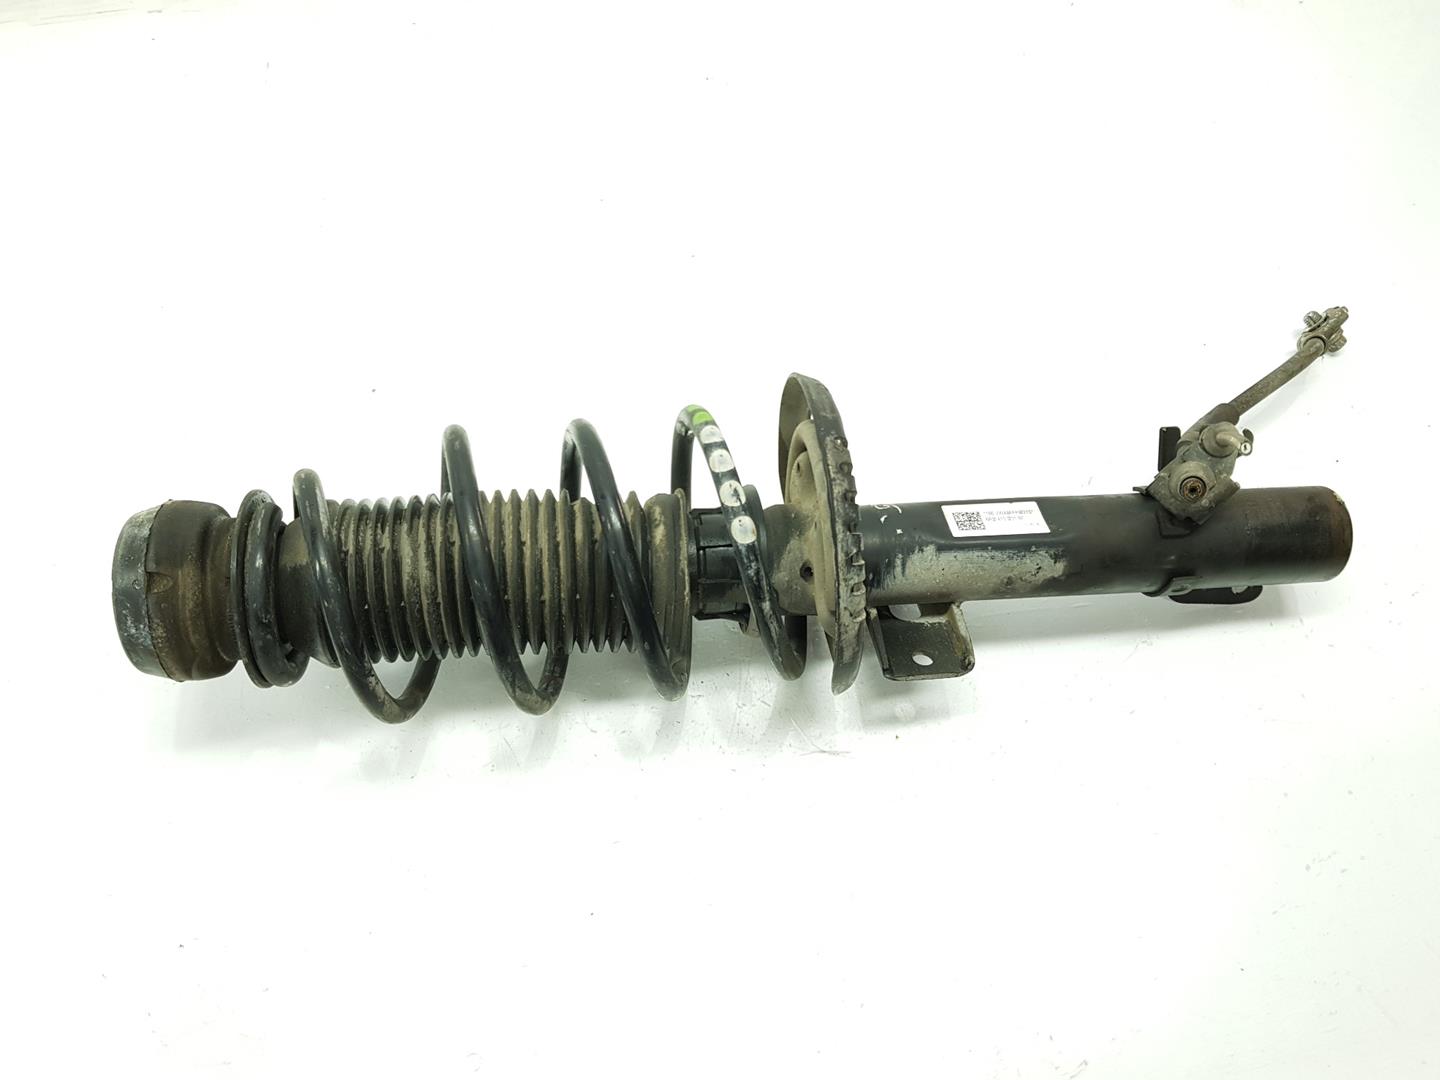 SEAT Toledo 4 generation (2012-2020) Front Right Shock Absorber 6R0413031BF, 6R0413031BF 23826587